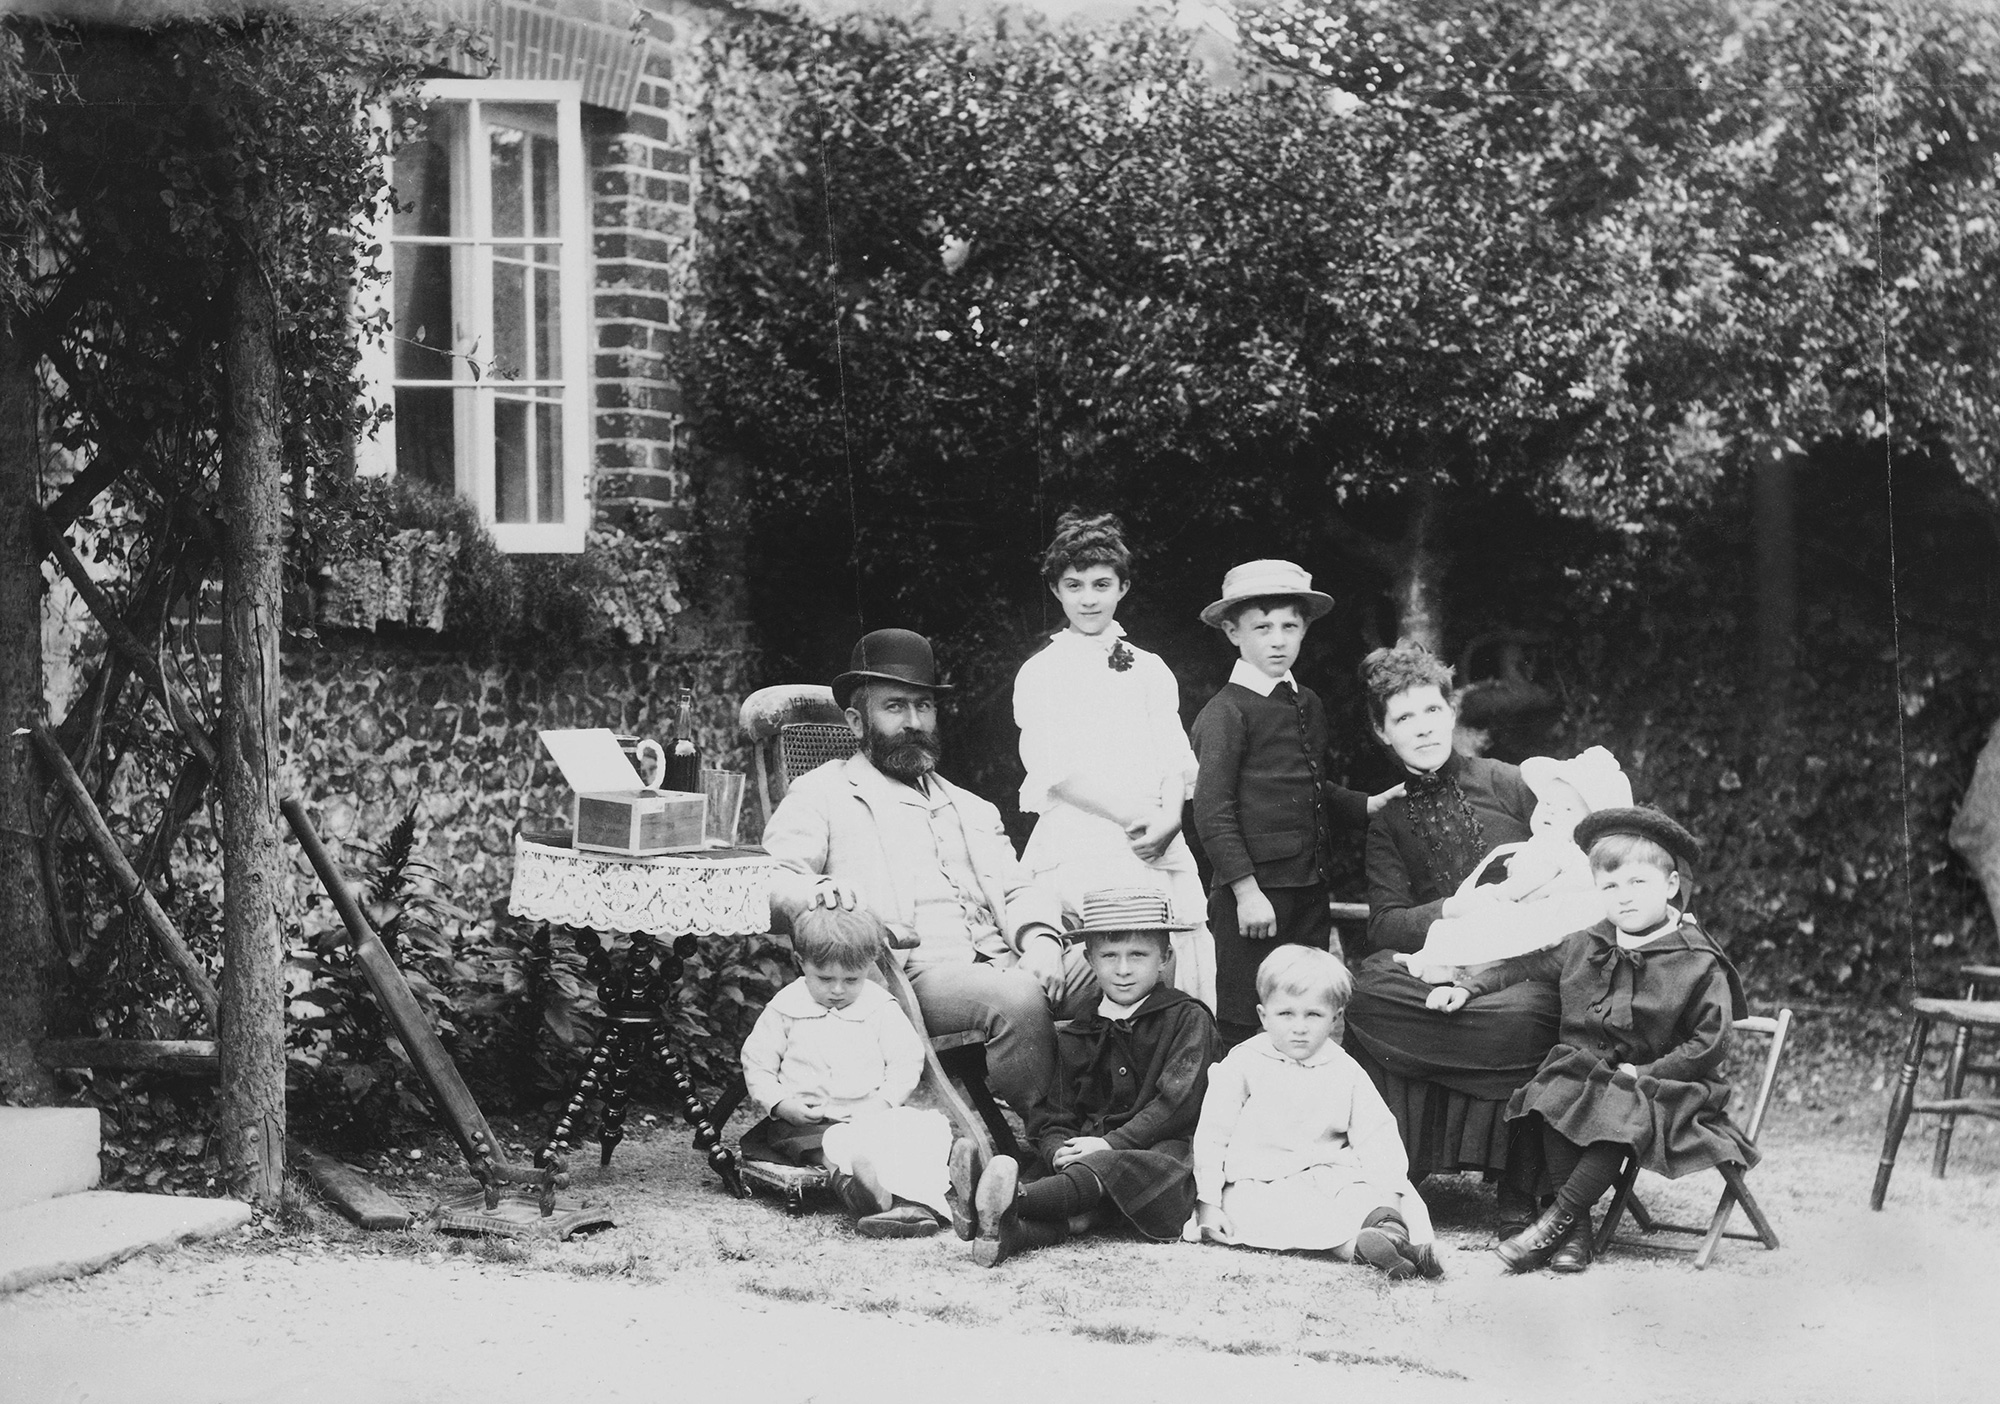 Group photograph of a family consisting of a father, a mother, and seven children ranging in ages.